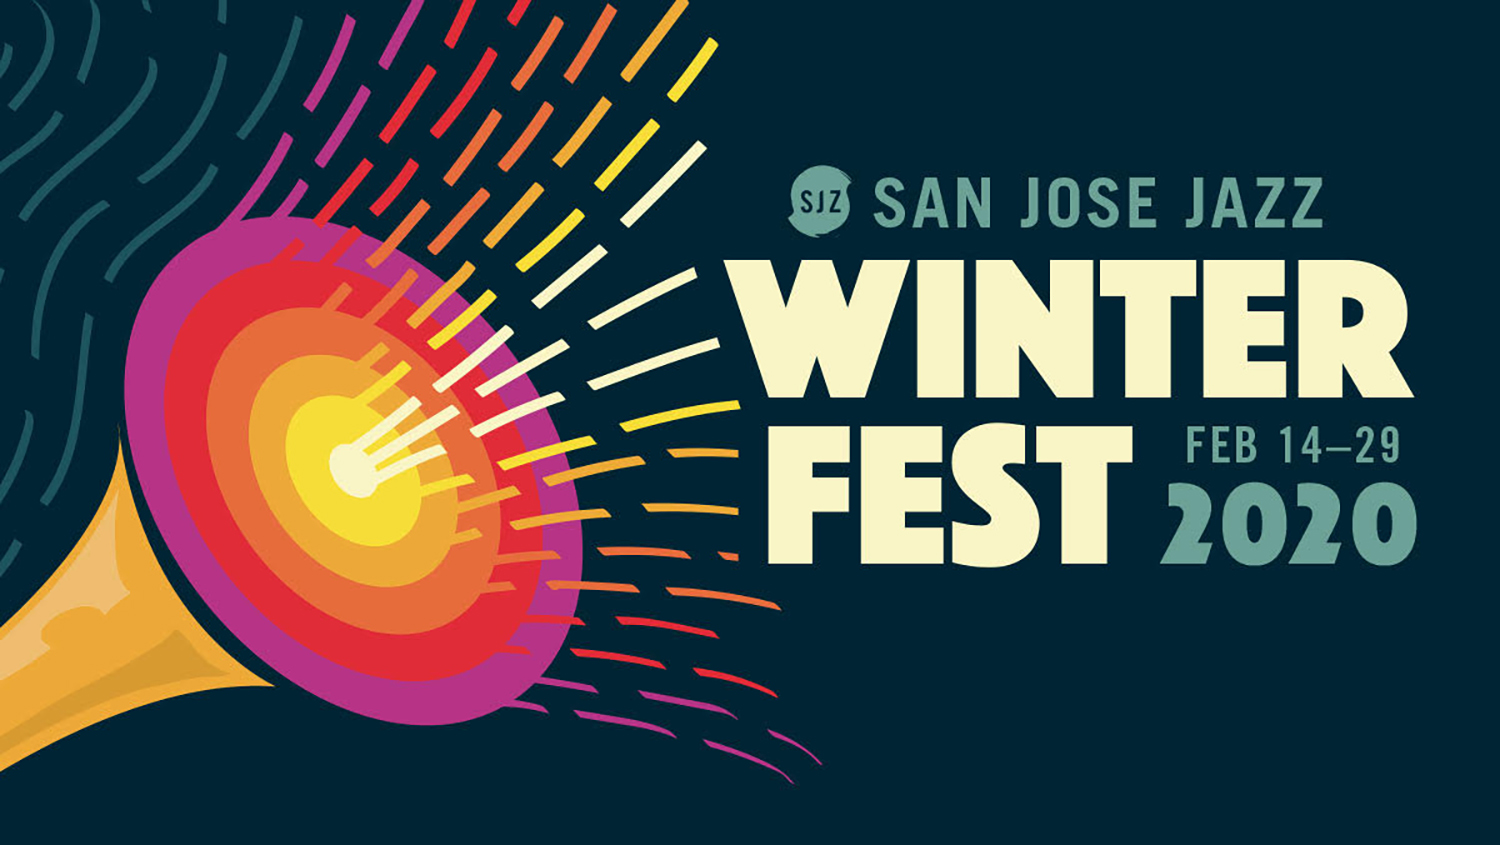 San Jose Jazz Winter Fest brings an intimate music experience to